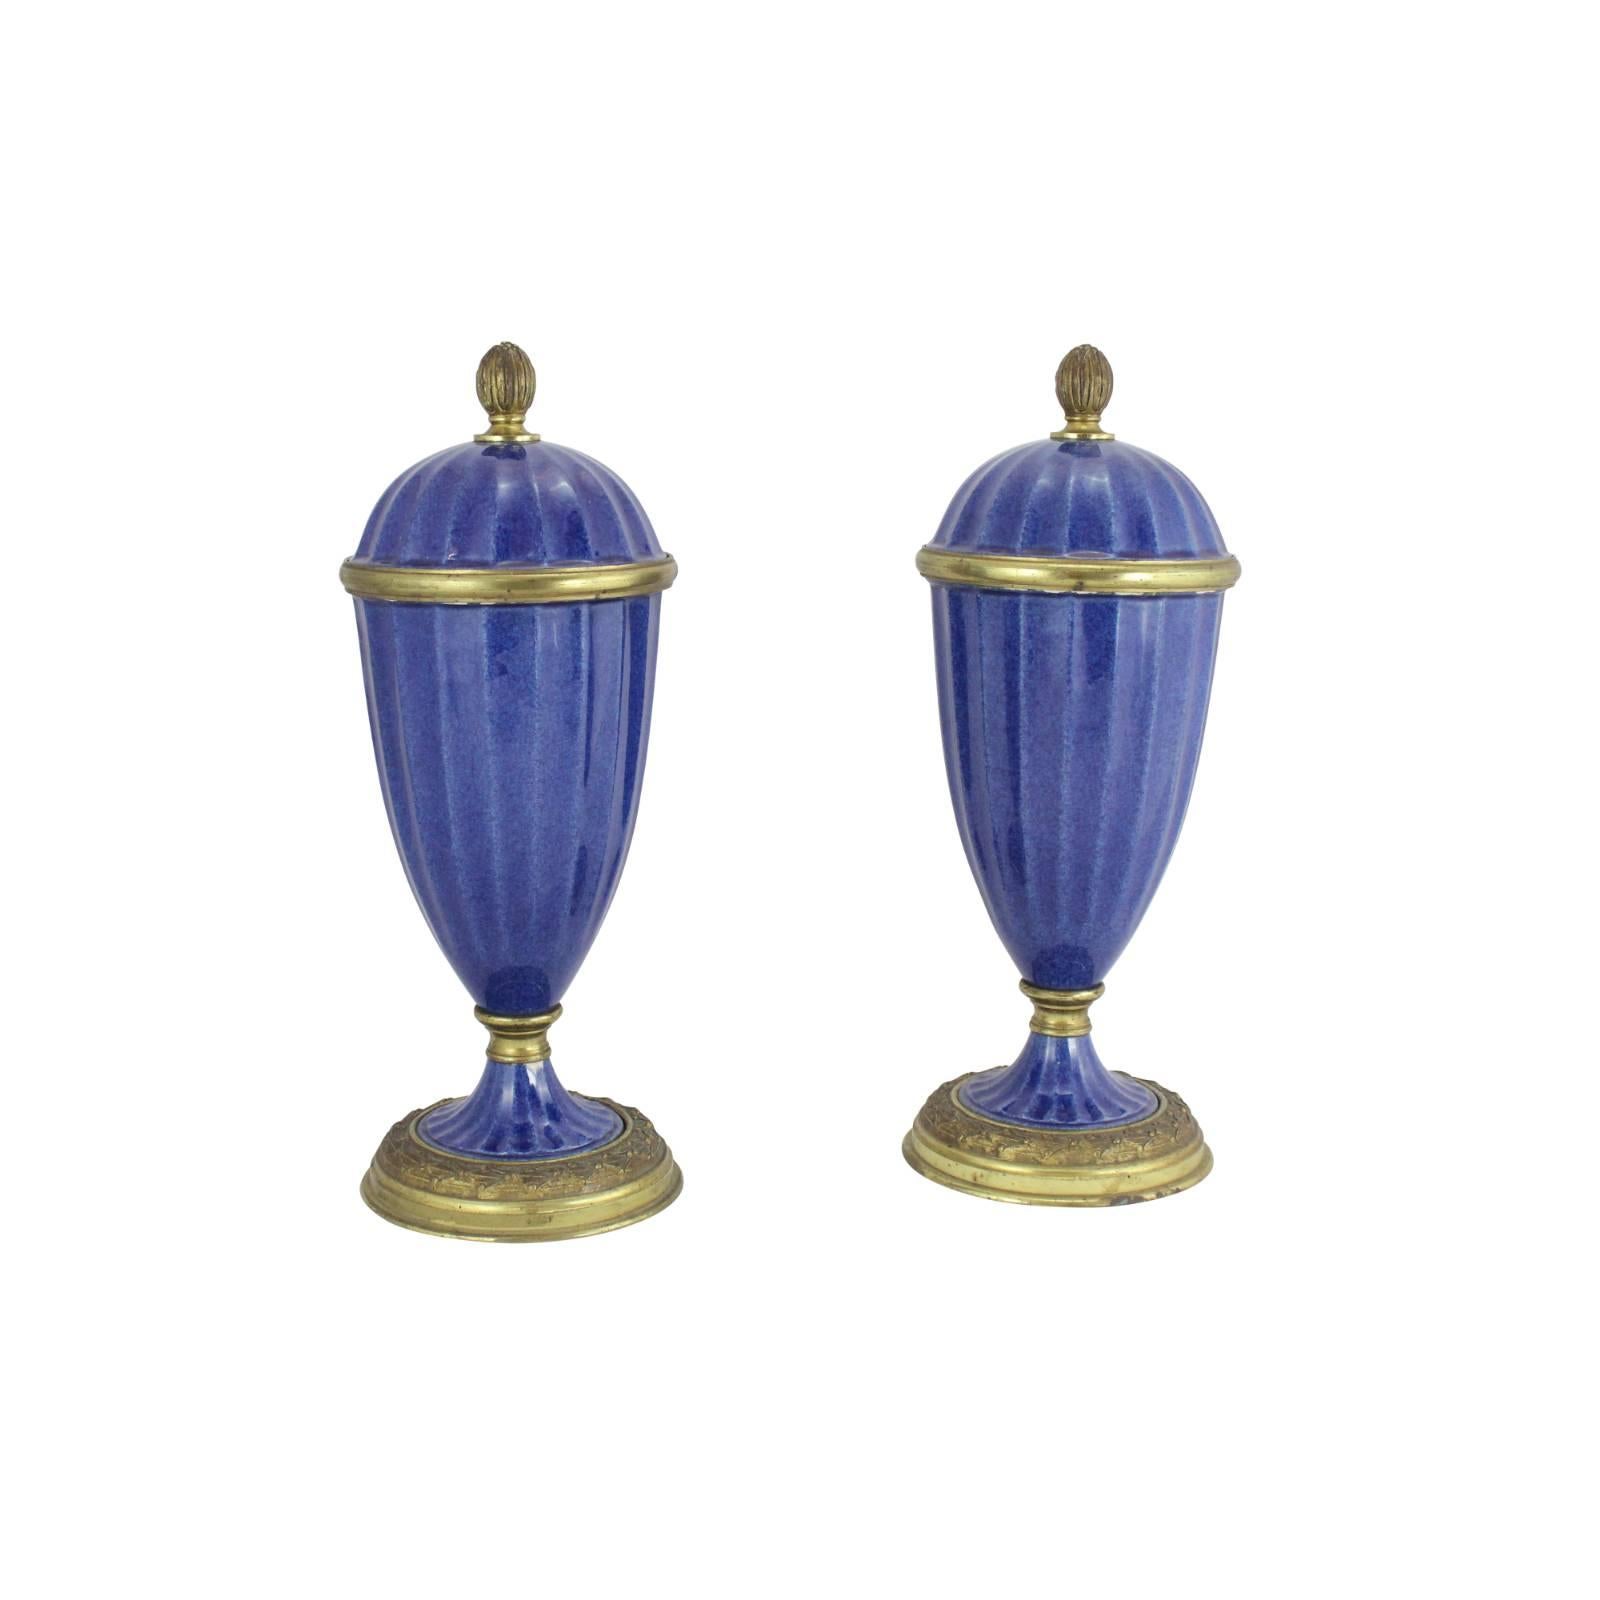 French Pair of Garniture in Lapis Blue by Paul Milet for Sevres